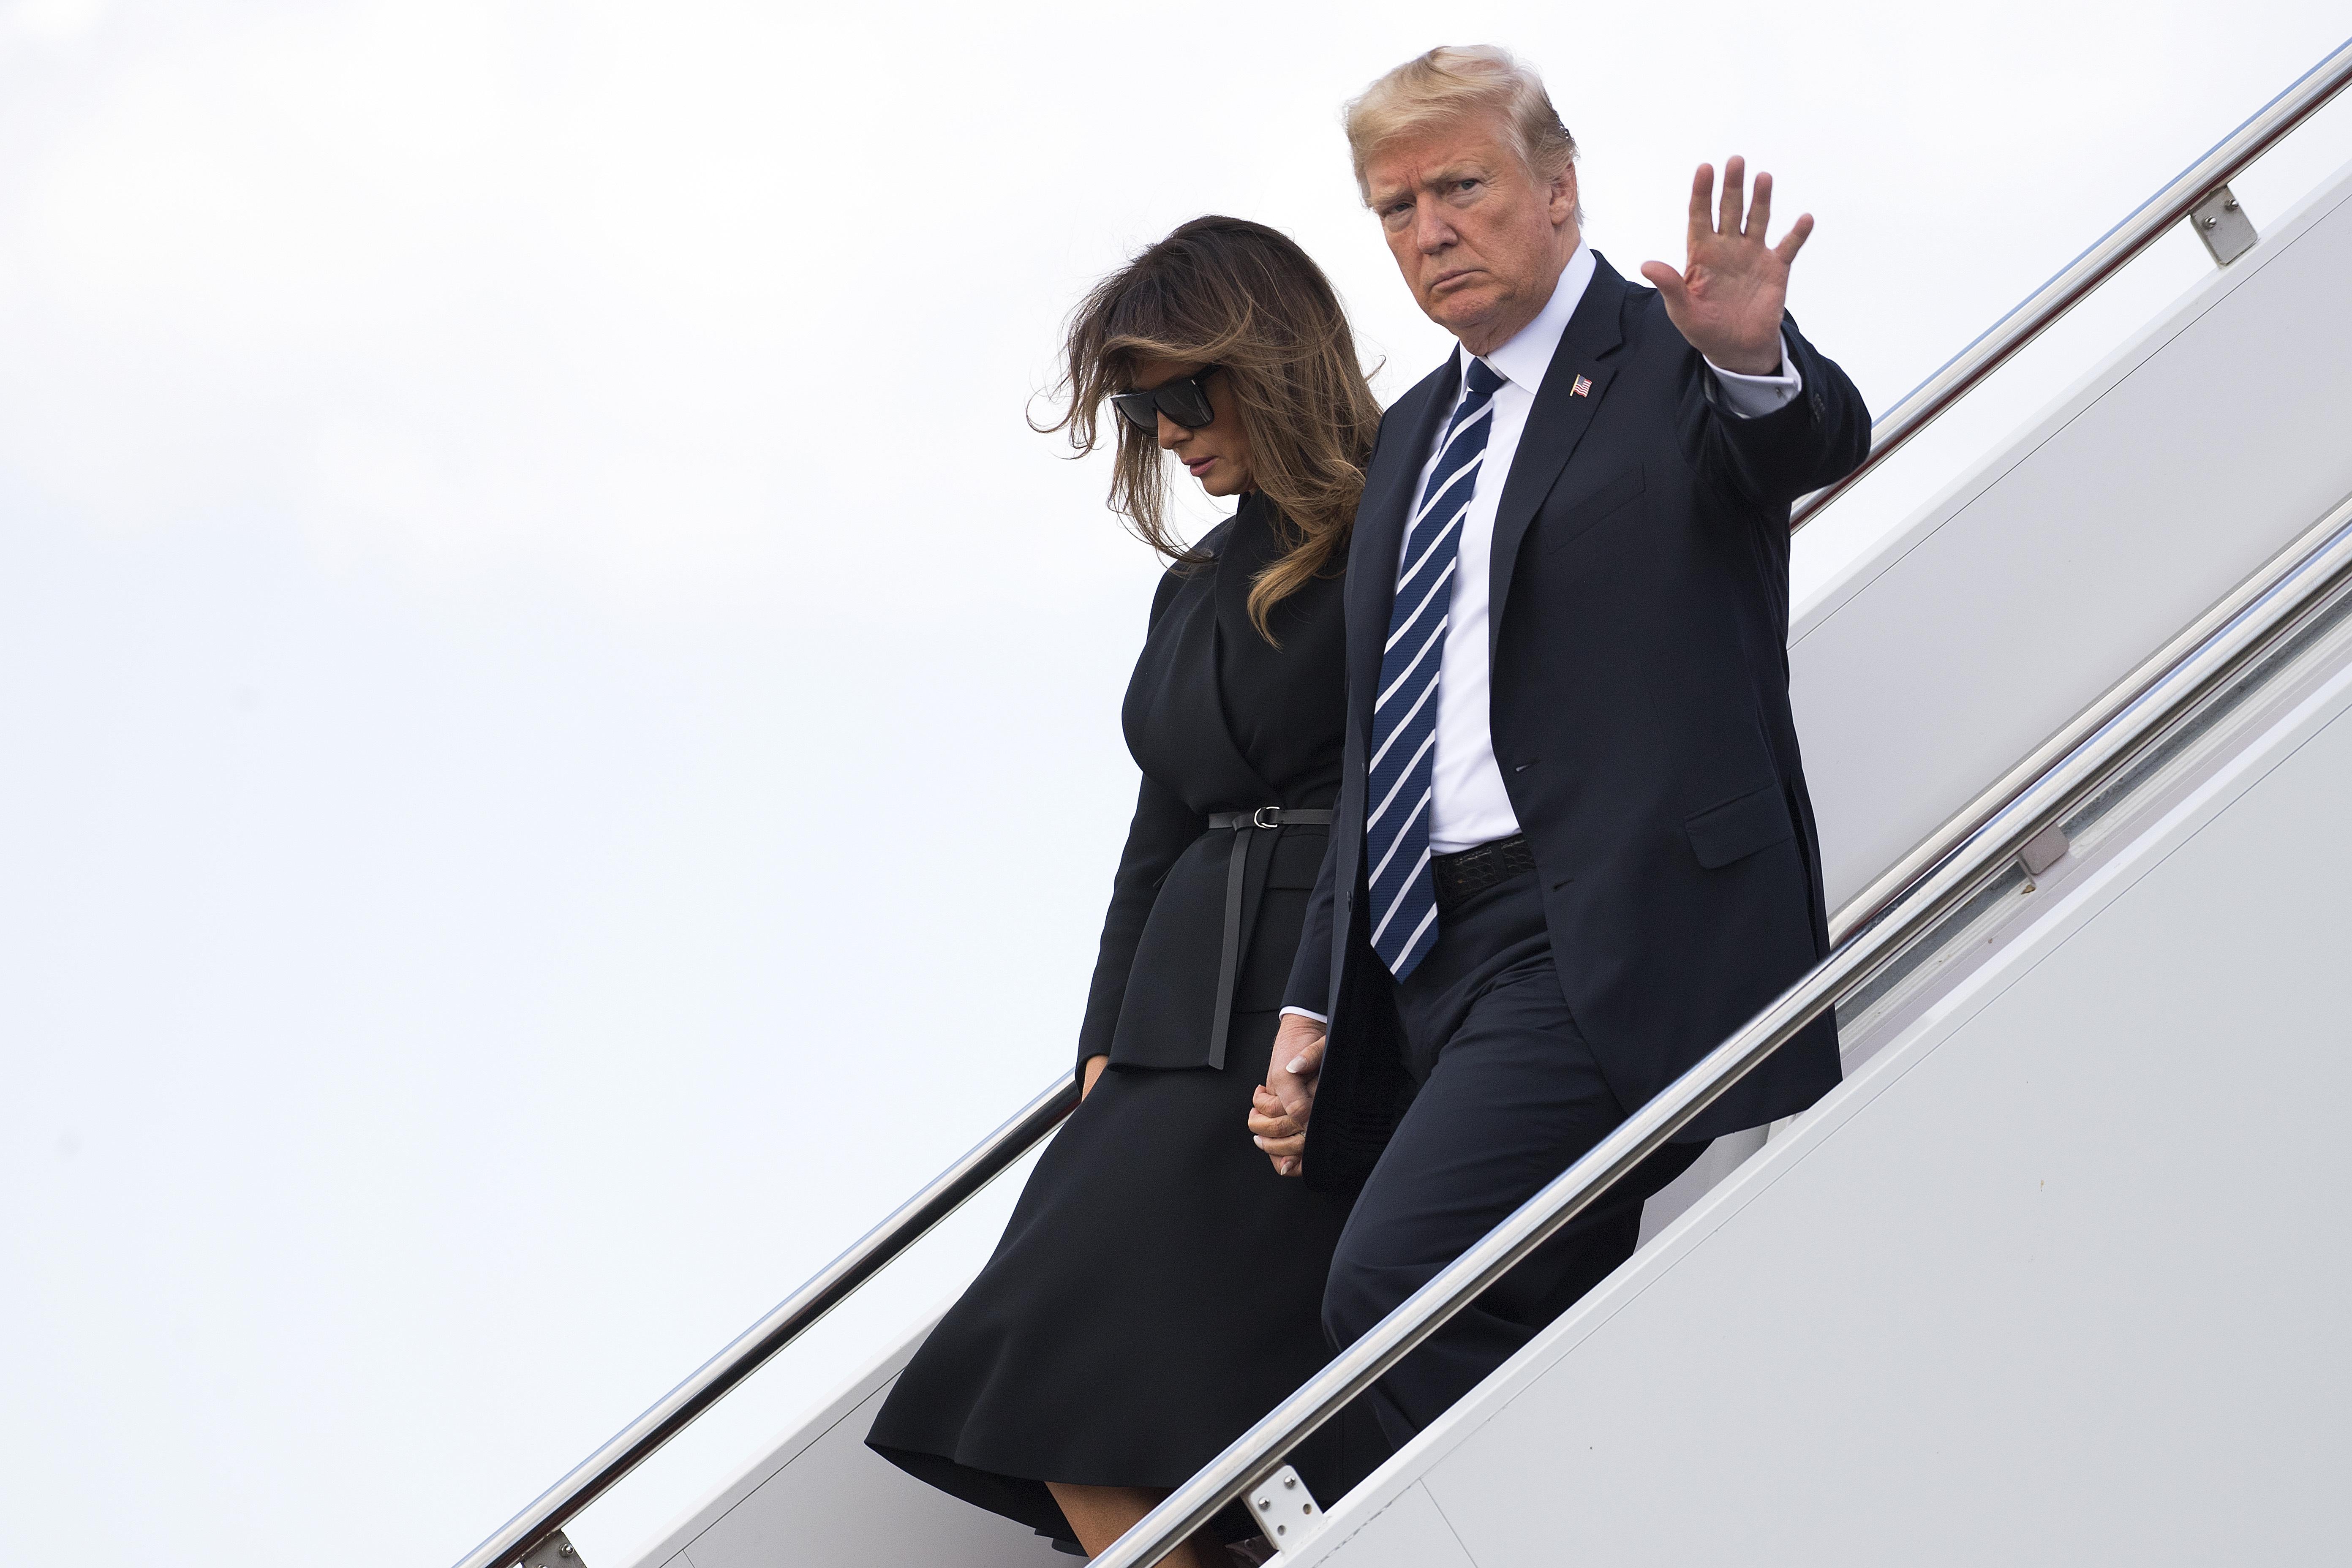 President Donald Trump and First Lady Melania Trump walk off Air Force One as they arrive in West Palm Beach, Florida, on March 2, 2018. / AFP PHOTO / JIM WATSON      